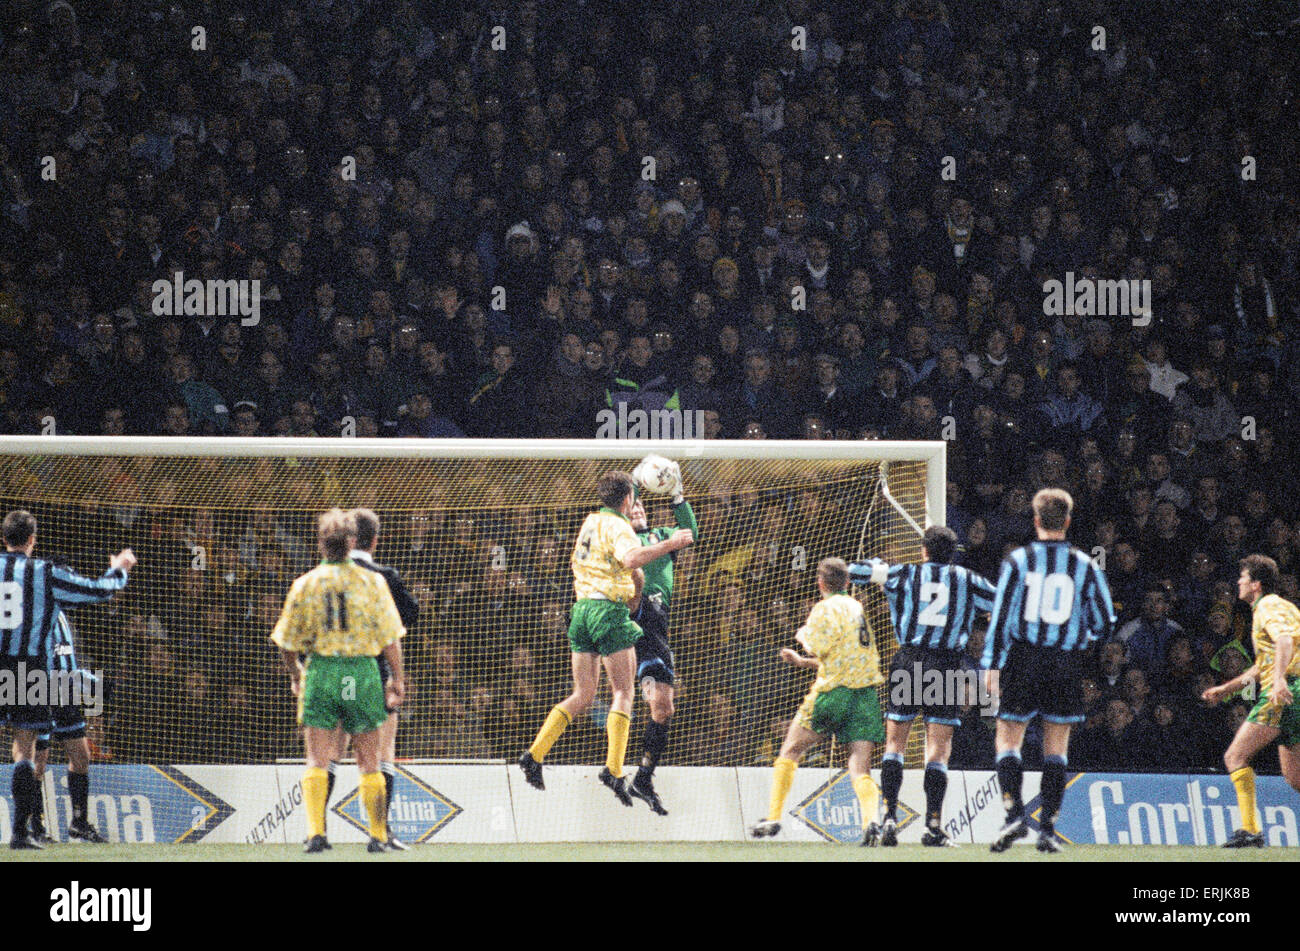 Norwich City 0 v Inter Milan 1 UEFA Cup Round 16 first leg at Bramall Lane. Inter Milan won one nil courtesy of a Dennis Berkamp penalty in the 80th minute. (Picture) Jeremy Goss (number eleven) looks on as Inter Milan's goalkeeper catches the ball. 24th November 1993. Stock Photo